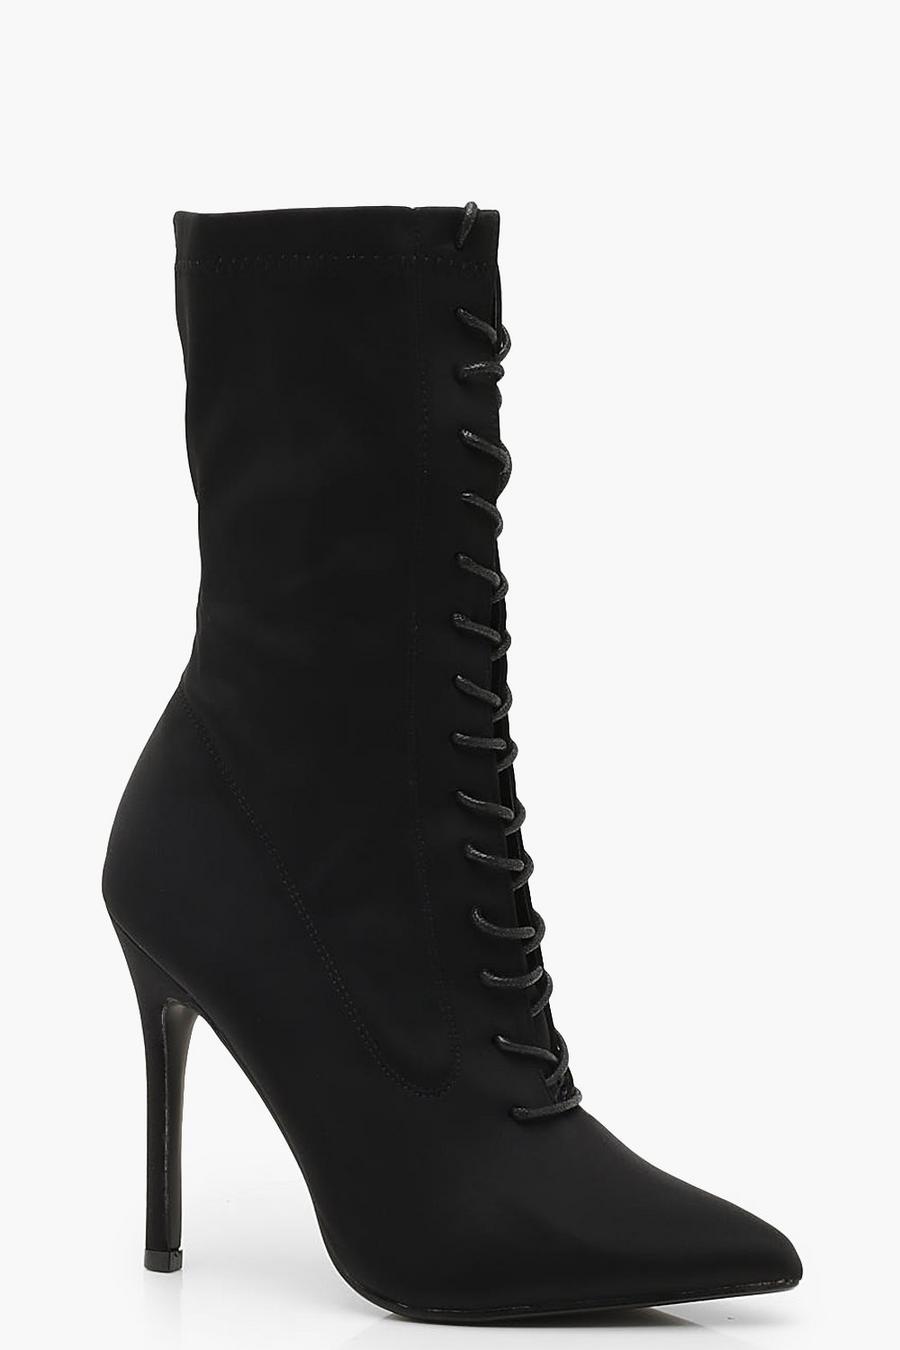 Black Lace Up Stiletto Heel Shoe Boots image number 1